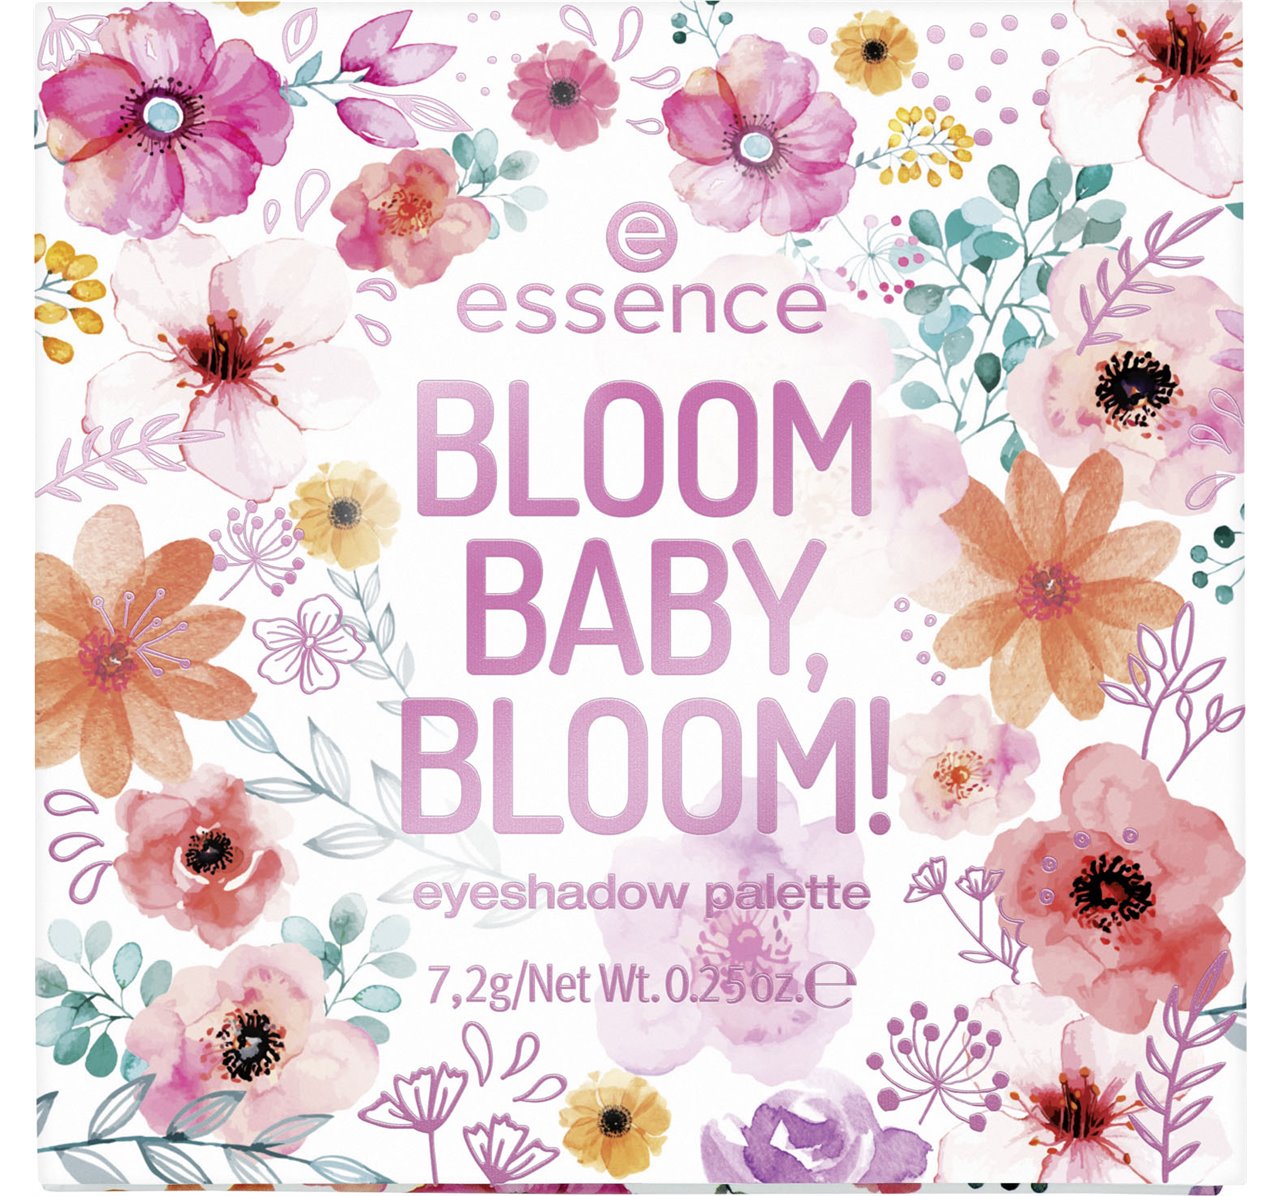 essence BLOOM BABY, BLOOM! eyeshadow palette 01 Poppy-ng Colours